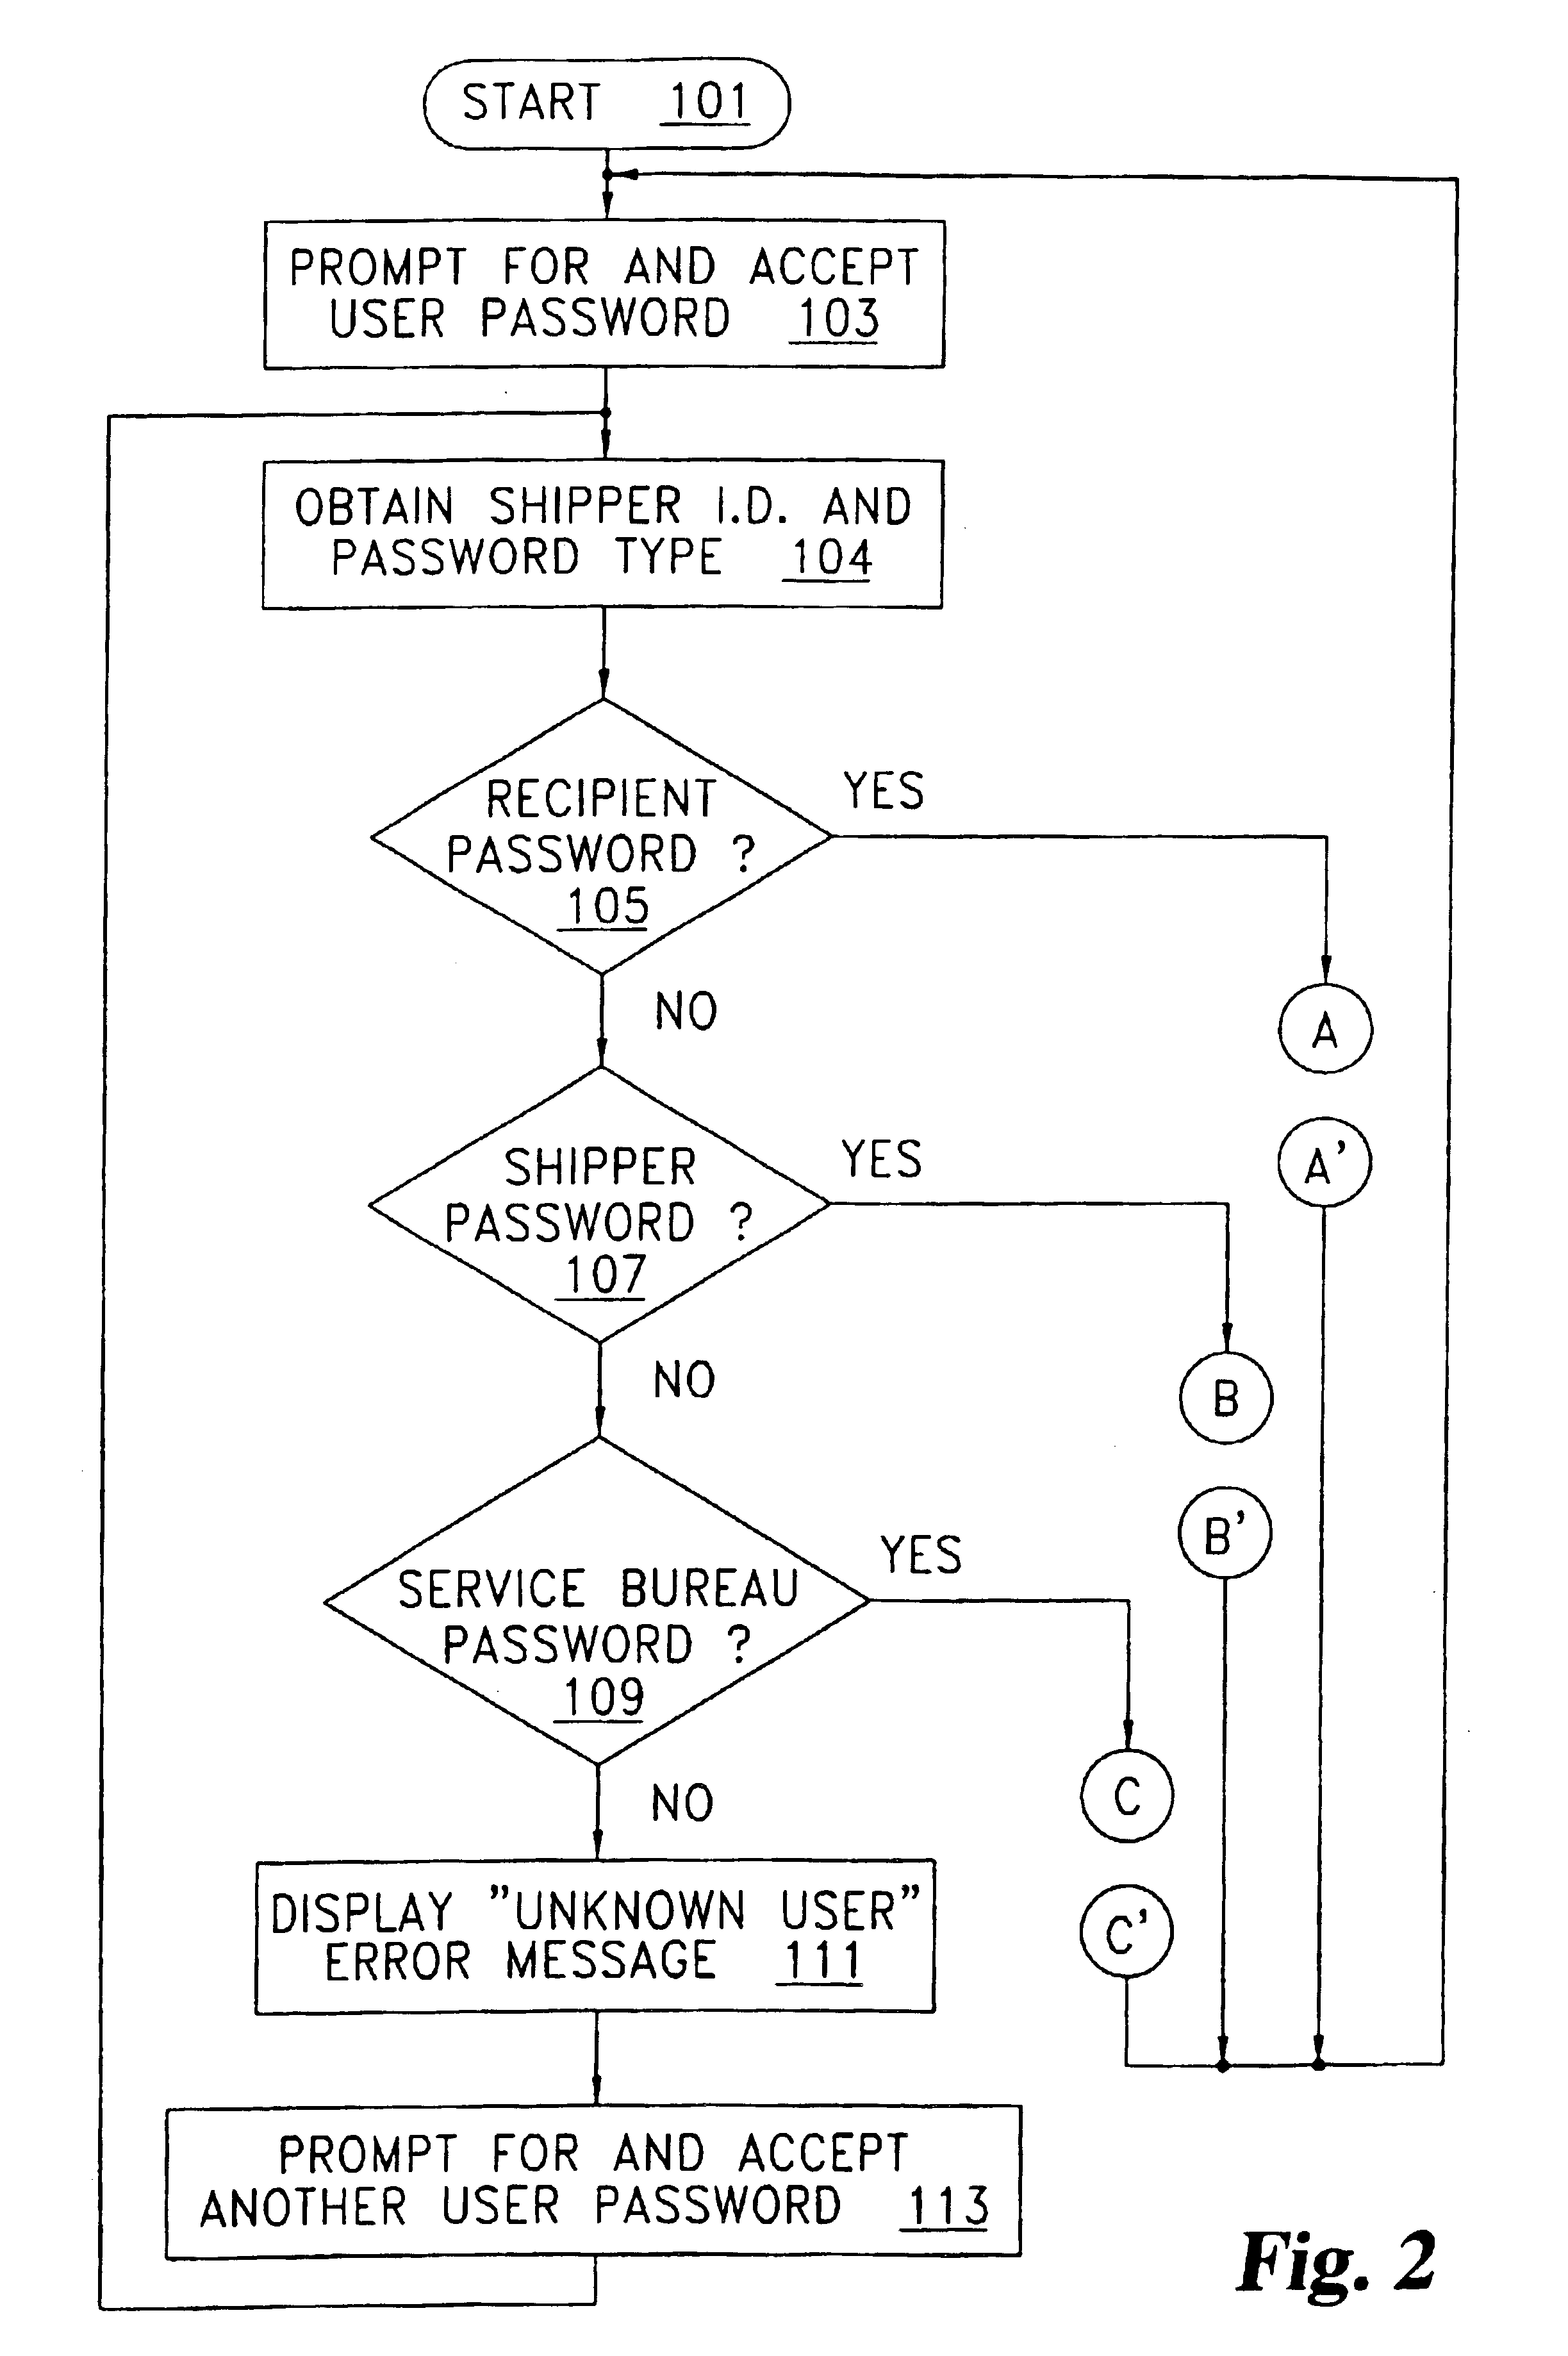 Accepting query that includes at least a portion of address without shipping identifier for tracking, delivery of shipment in computer network